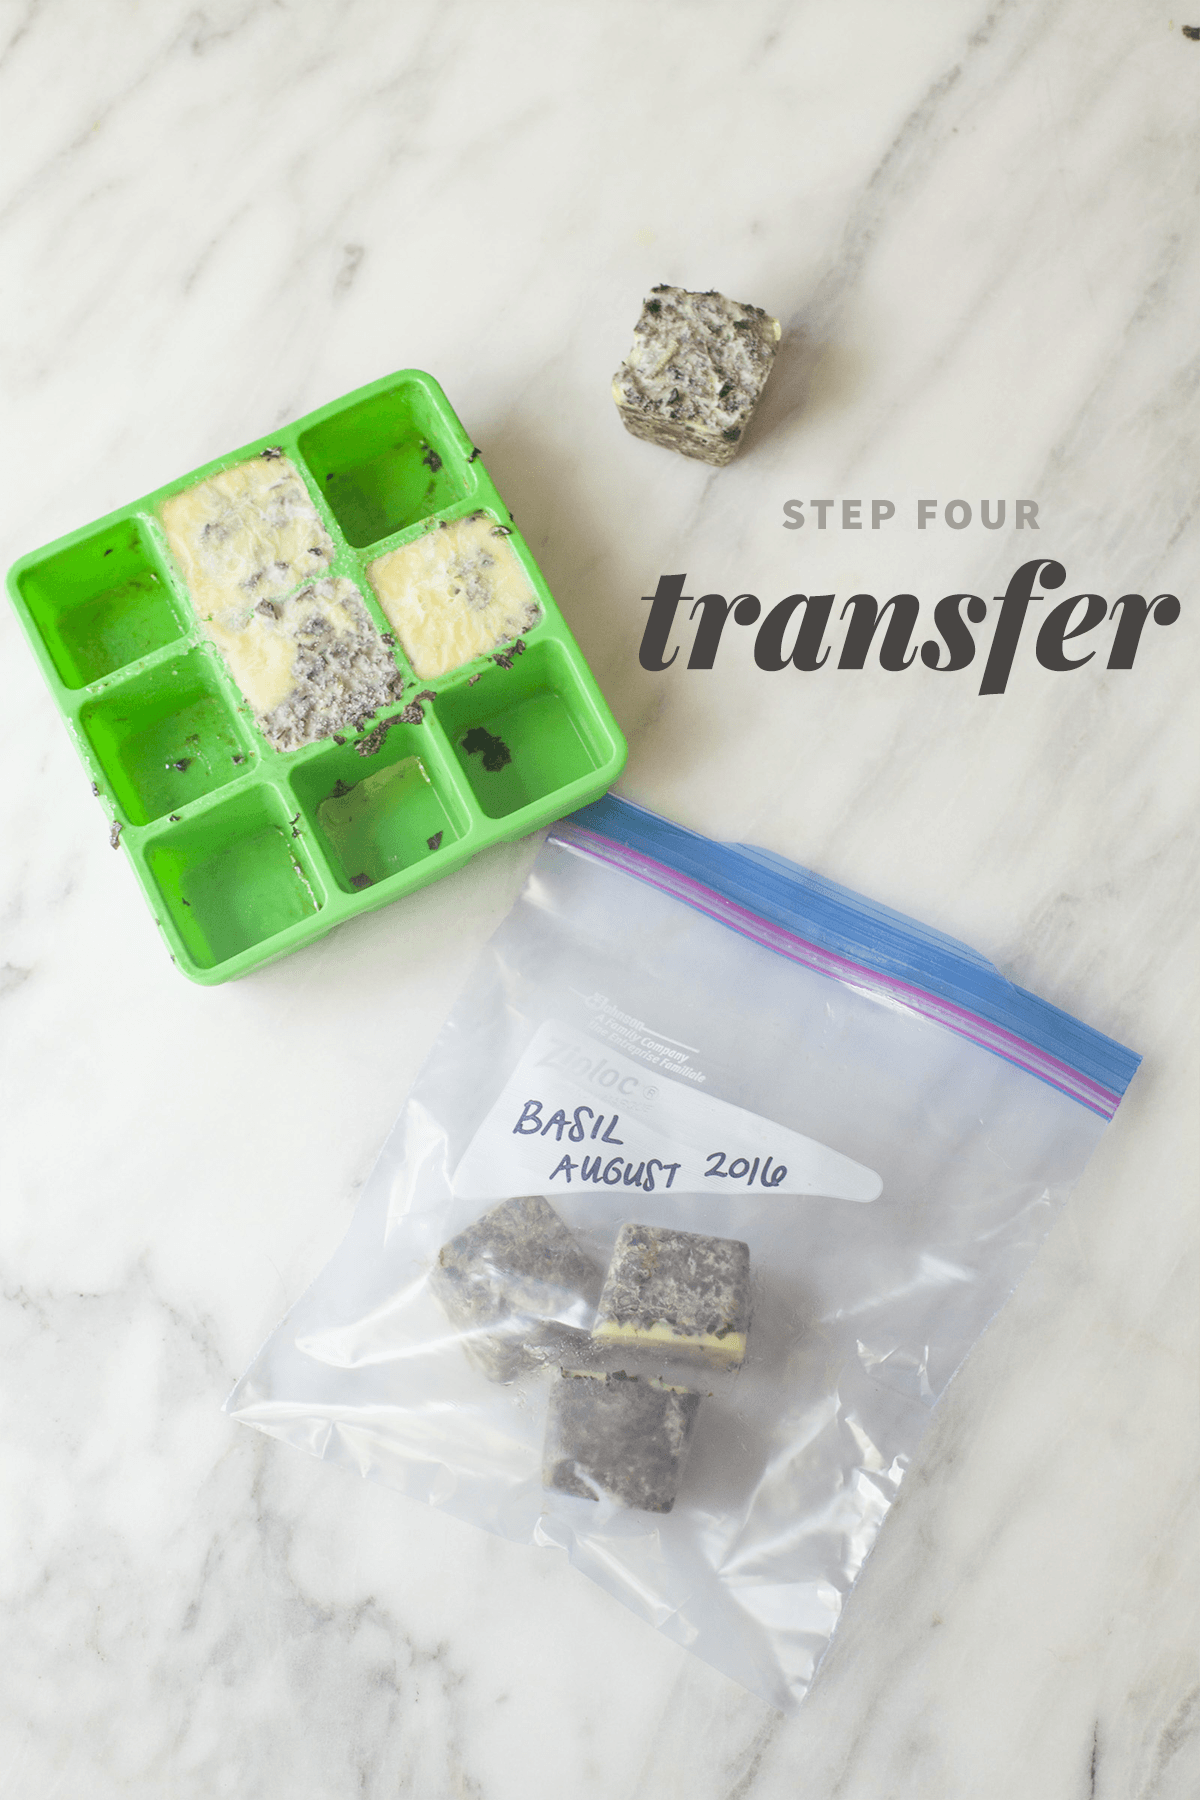 Frozen cubes of basil are in both an herb freezing bag and a labeled zip-top bag. A text overlay reads "Step Four: Transfer."